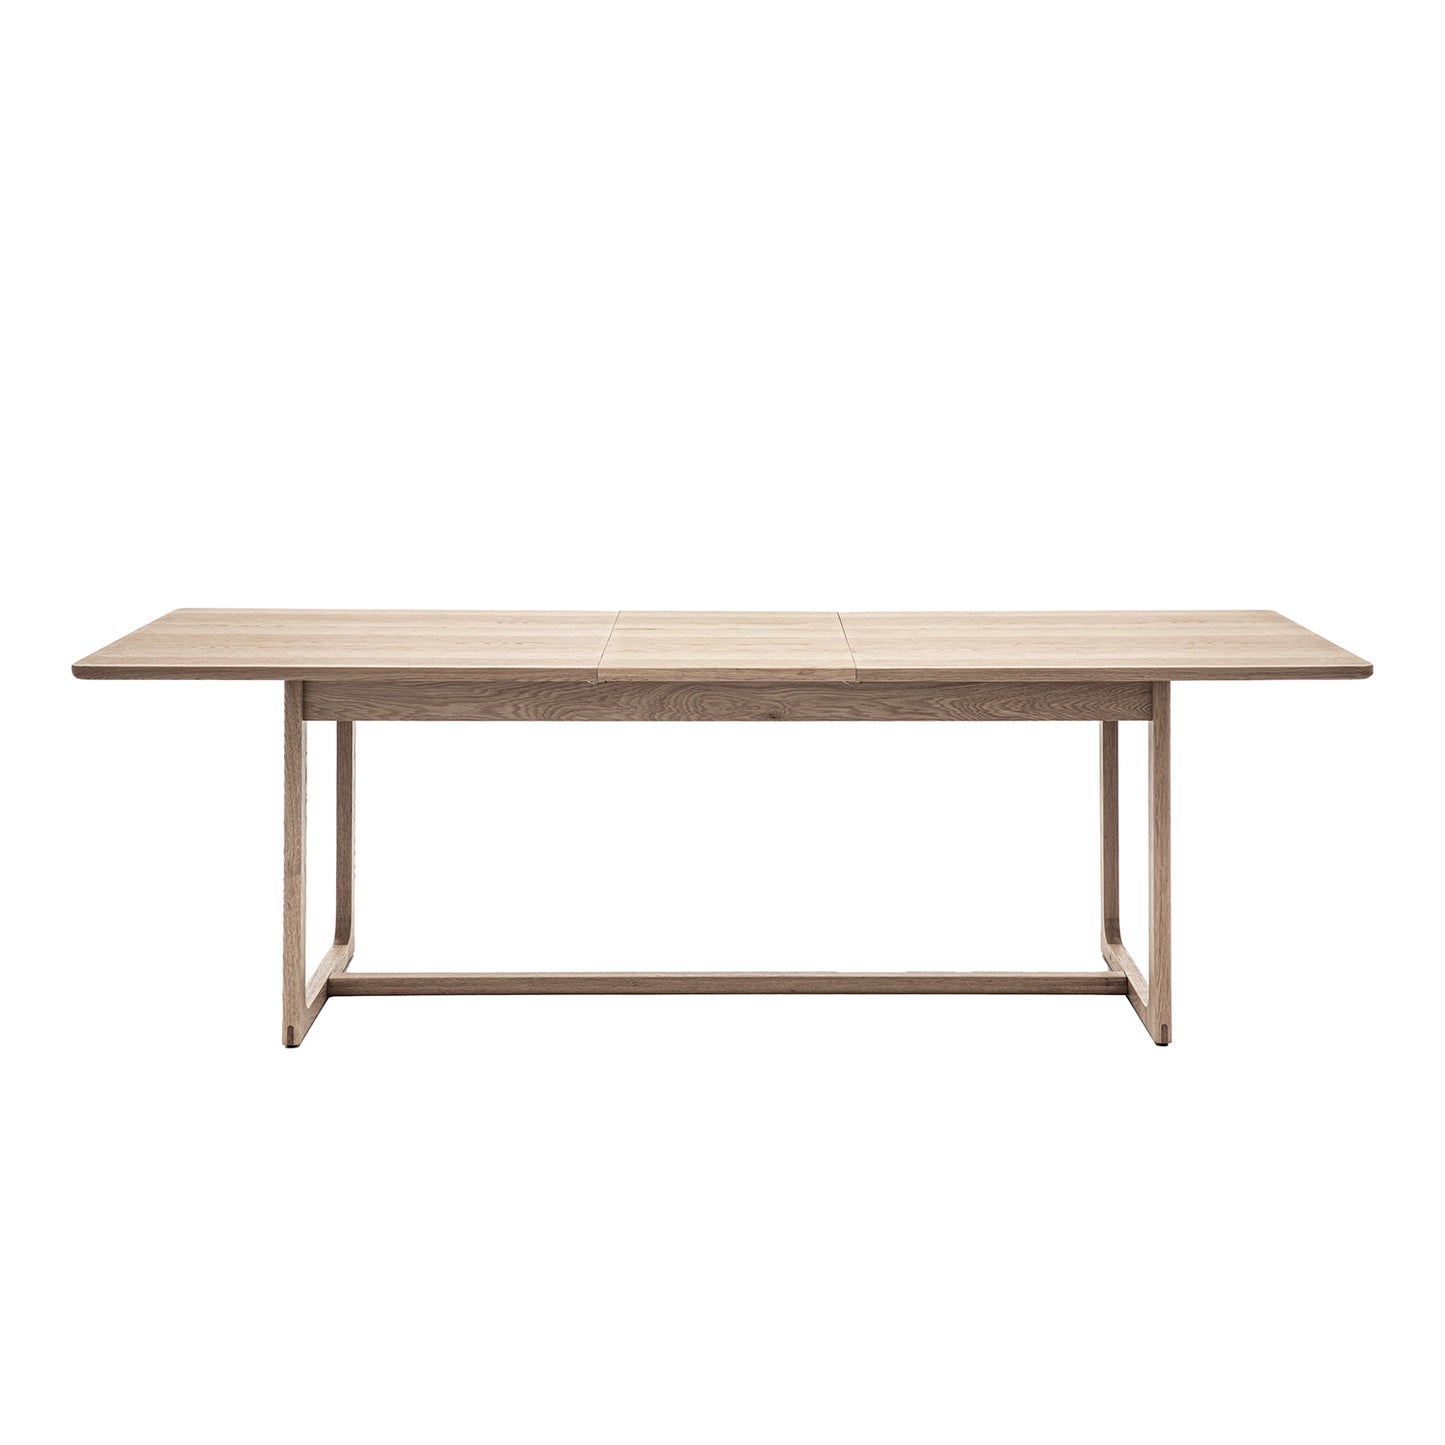 Maurice Extending Dining Table:- 200/250x95x75cm / Smoked